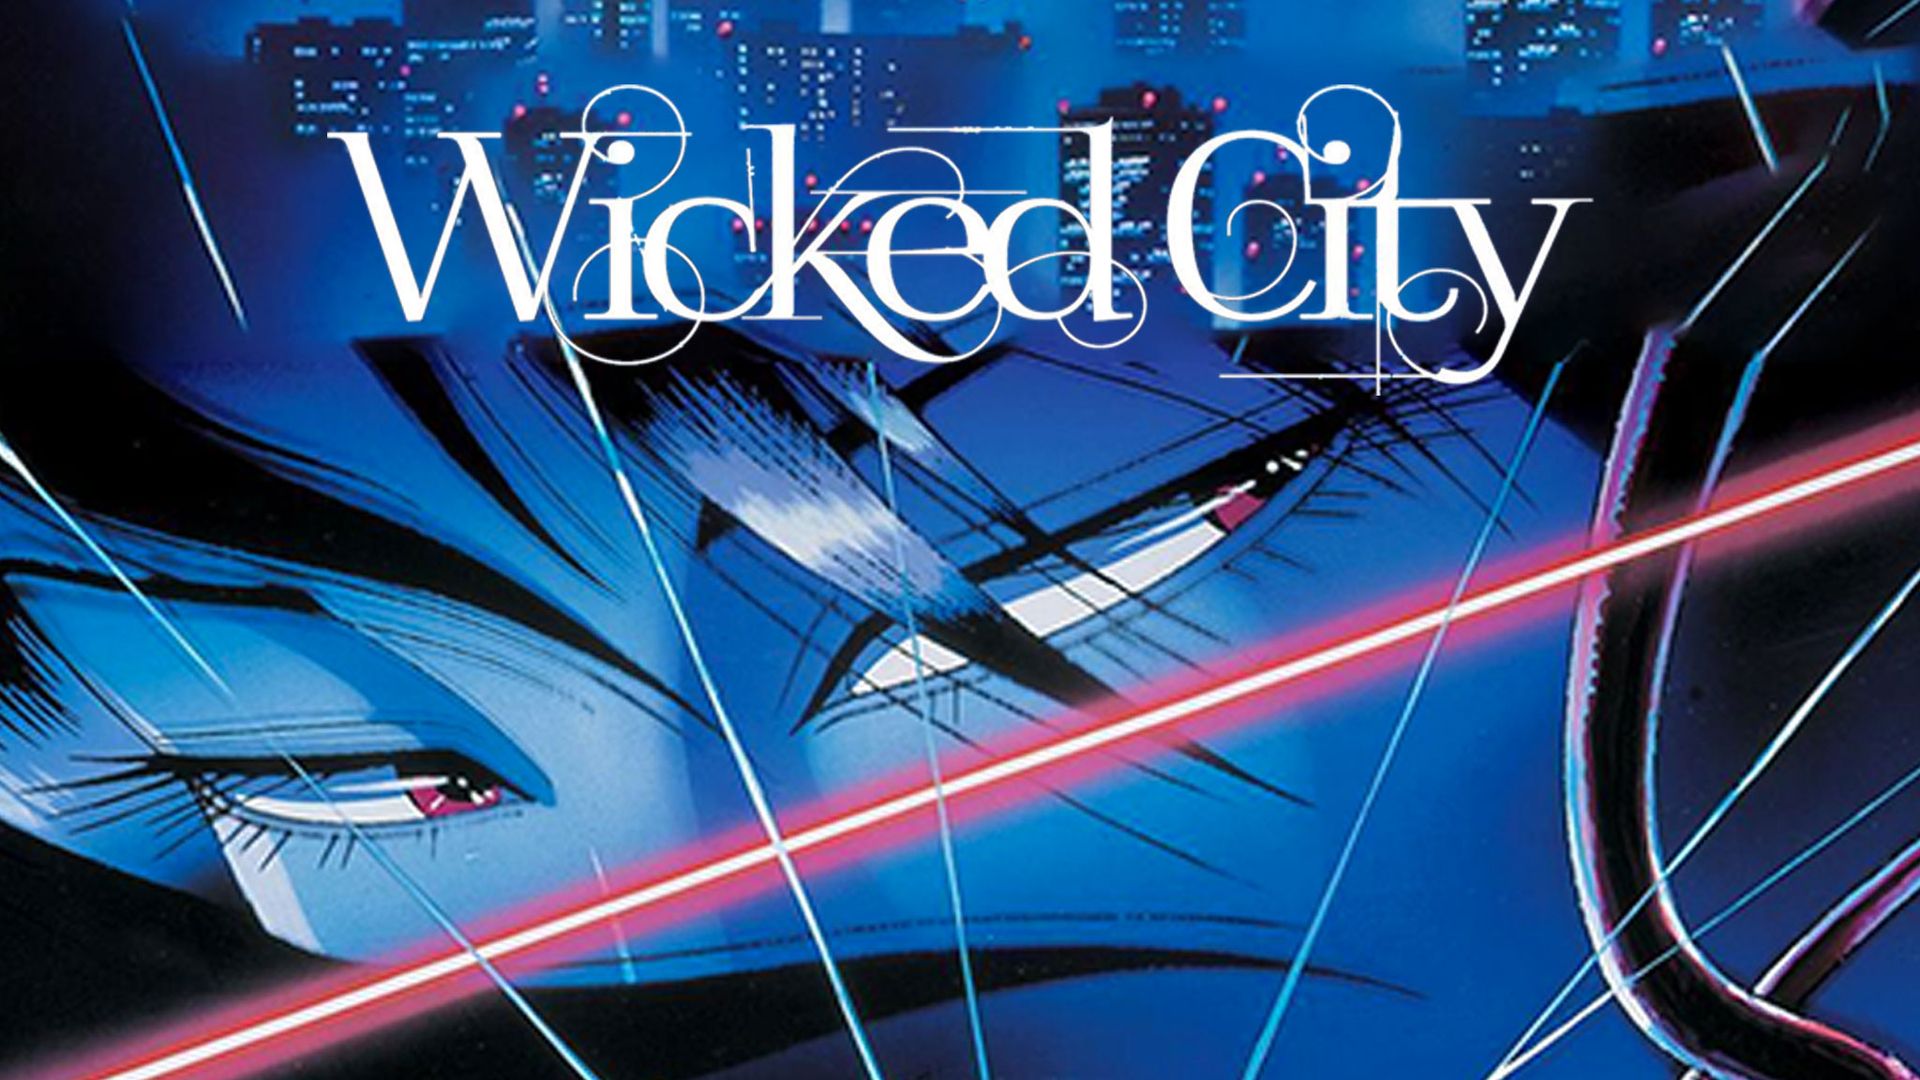 Wicked City - The city of enchanting beasts